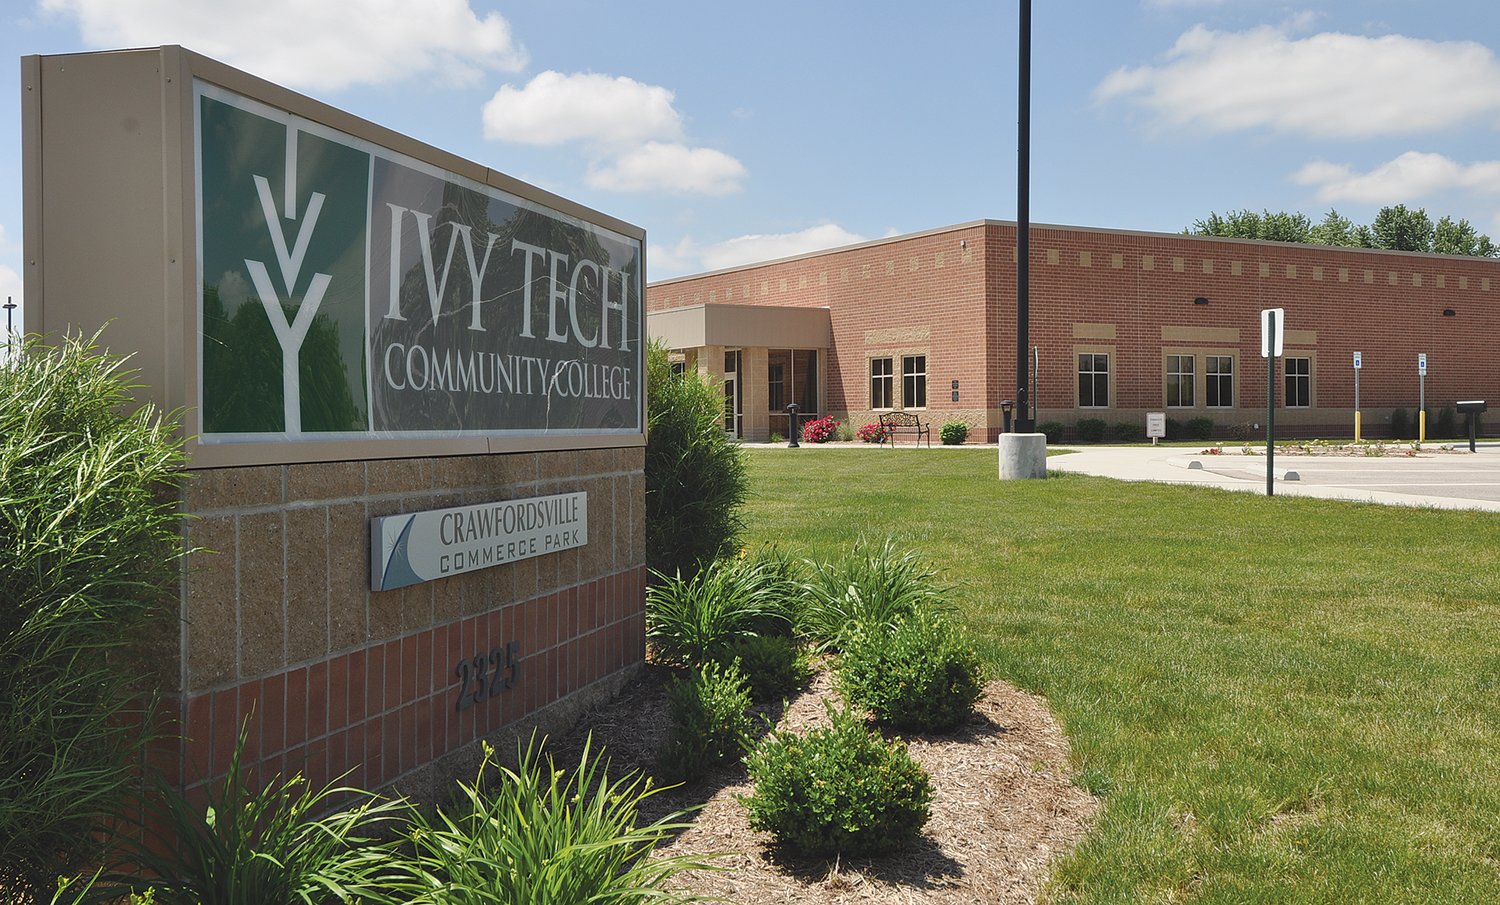 Ivy Tech Community College in Crawfordsville will offer in-person classes in August.